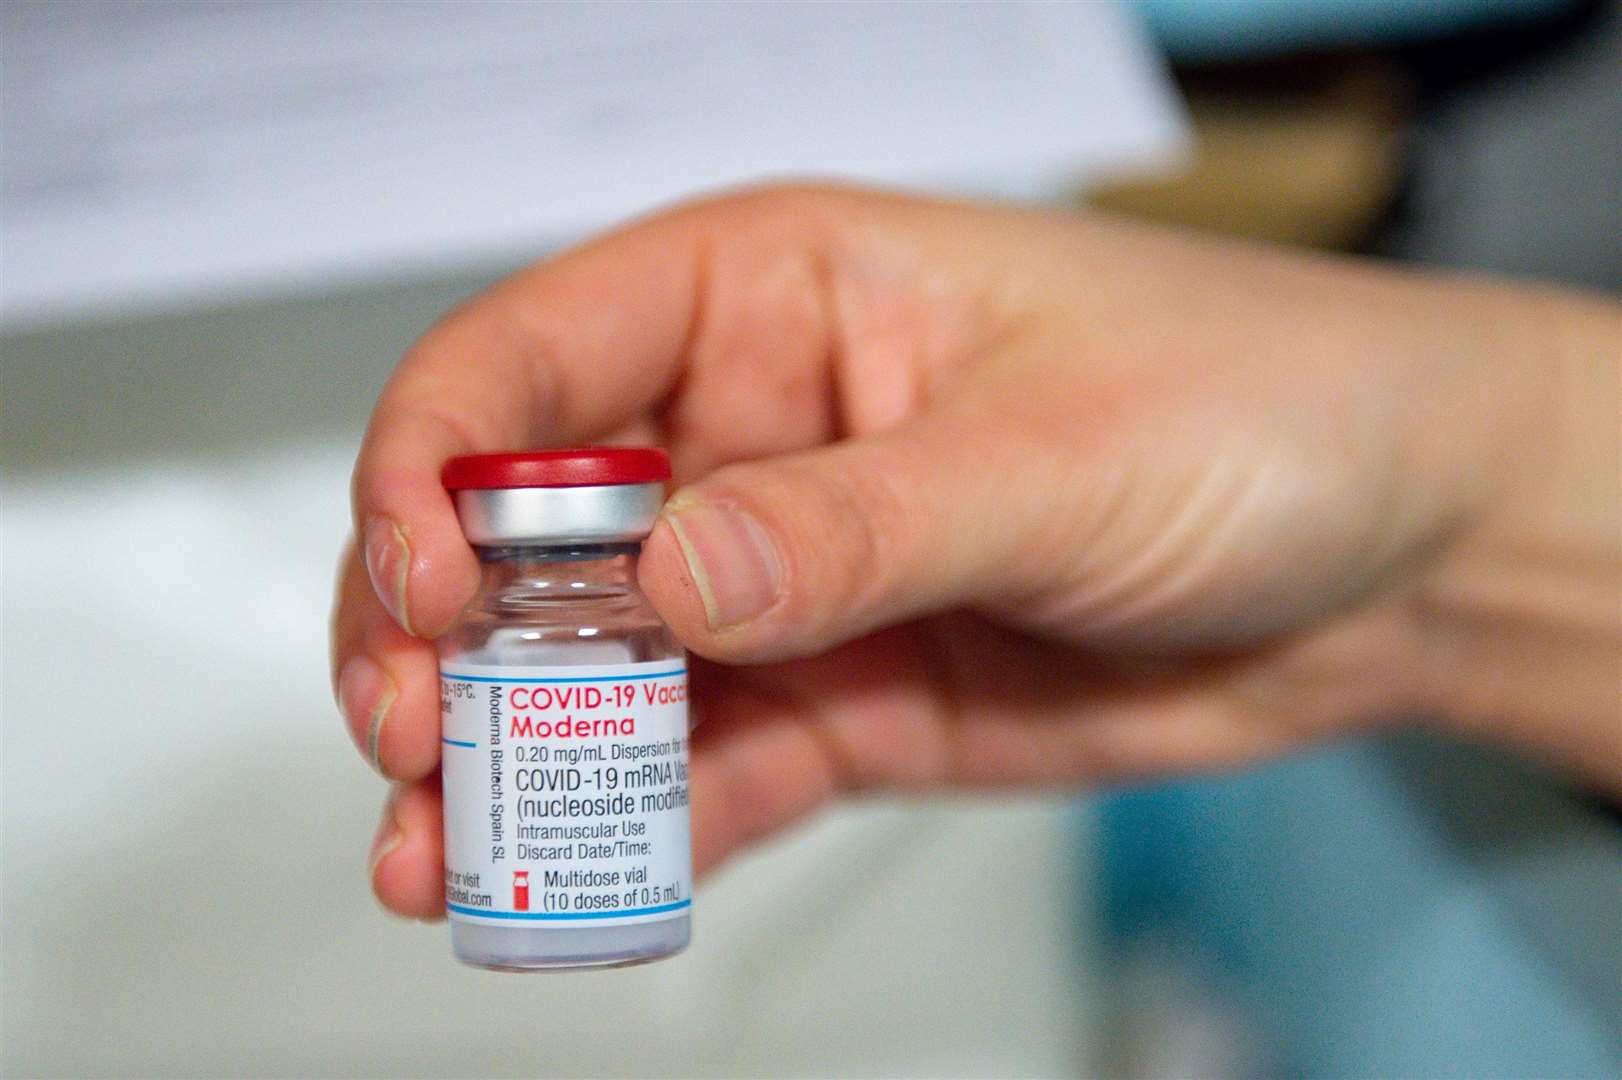 The Moderna vaccine is the third to be administered in the UK after the Pfizer and Oxford/AstraZeneca jabs (Jacob King/PA)